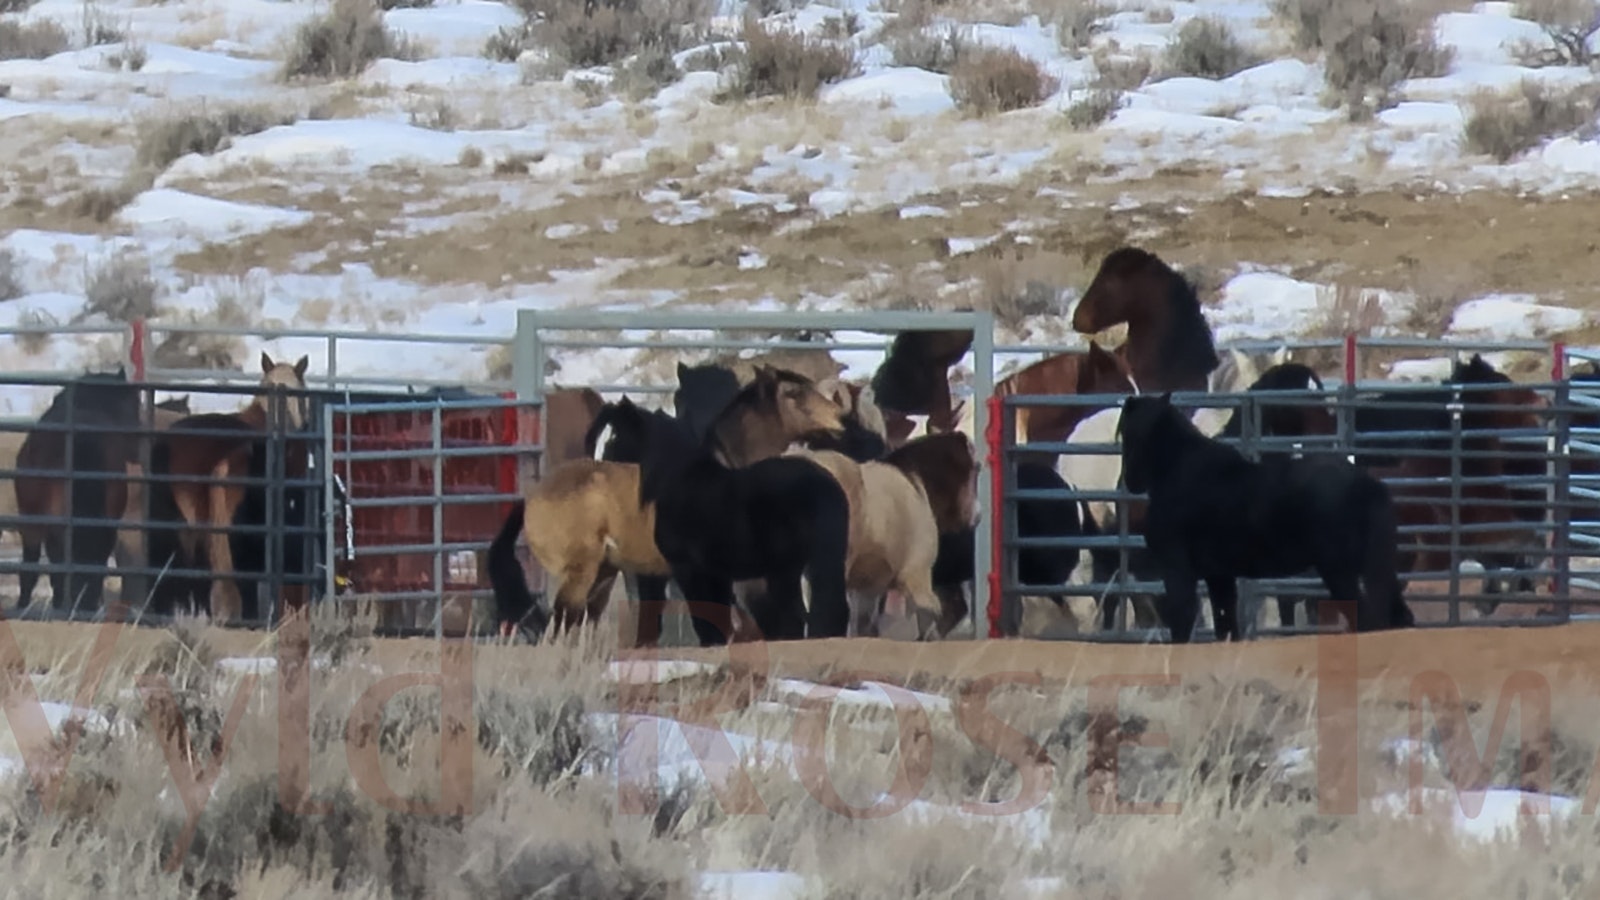 Corrals are being used by the Bureau of Land Management hold some horses from the McCollough Peaks mustang herd in Park County. Wild horse advocates claim that the corrals are cruel.